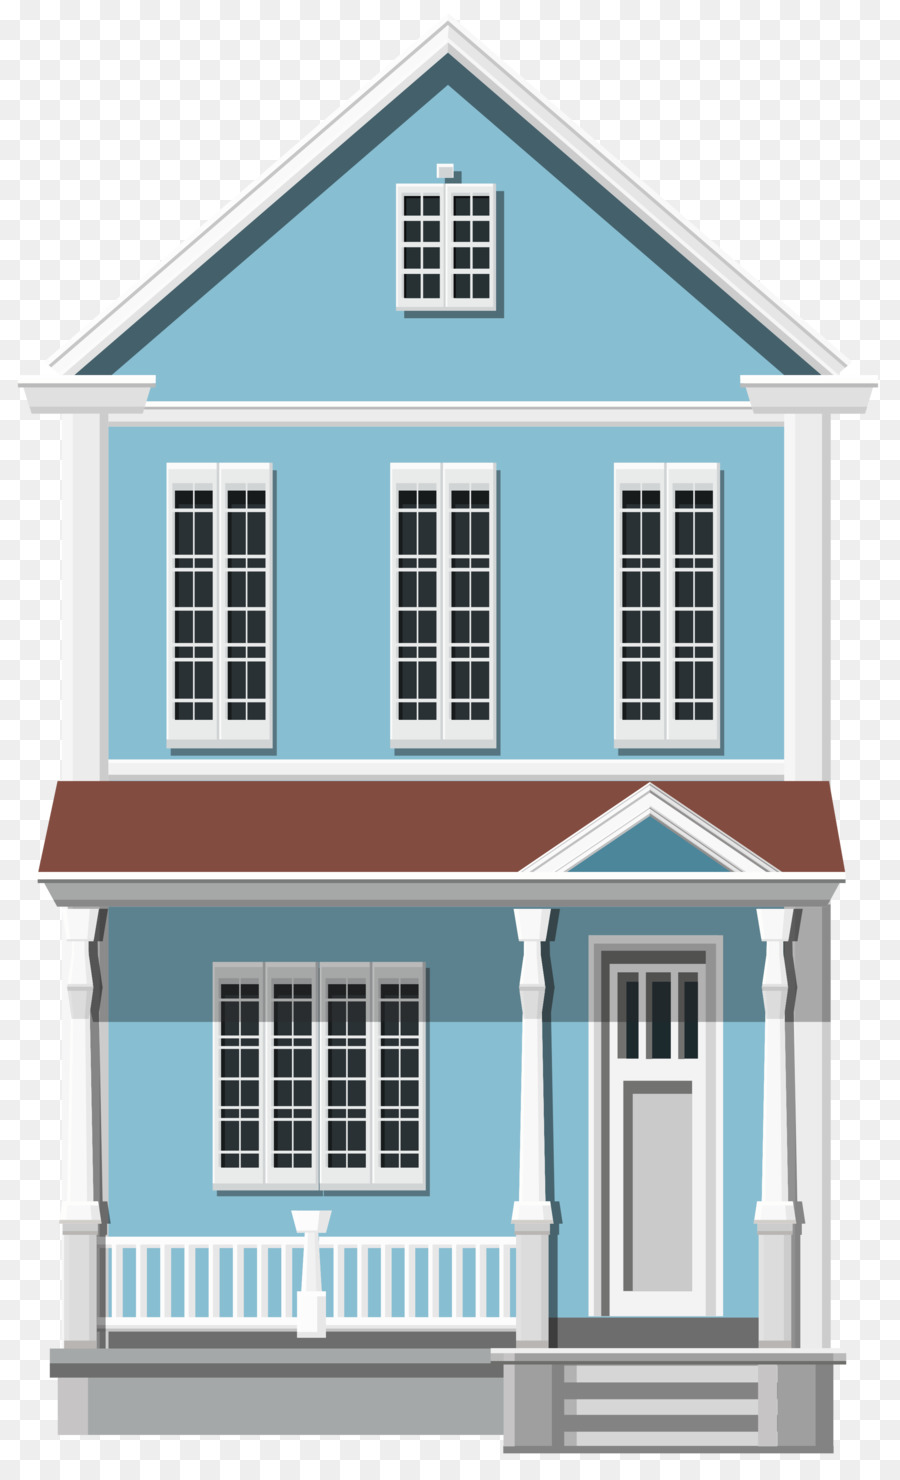 House Download Clip art - house png download - 2438*3974 - Free Transparent House png Download.